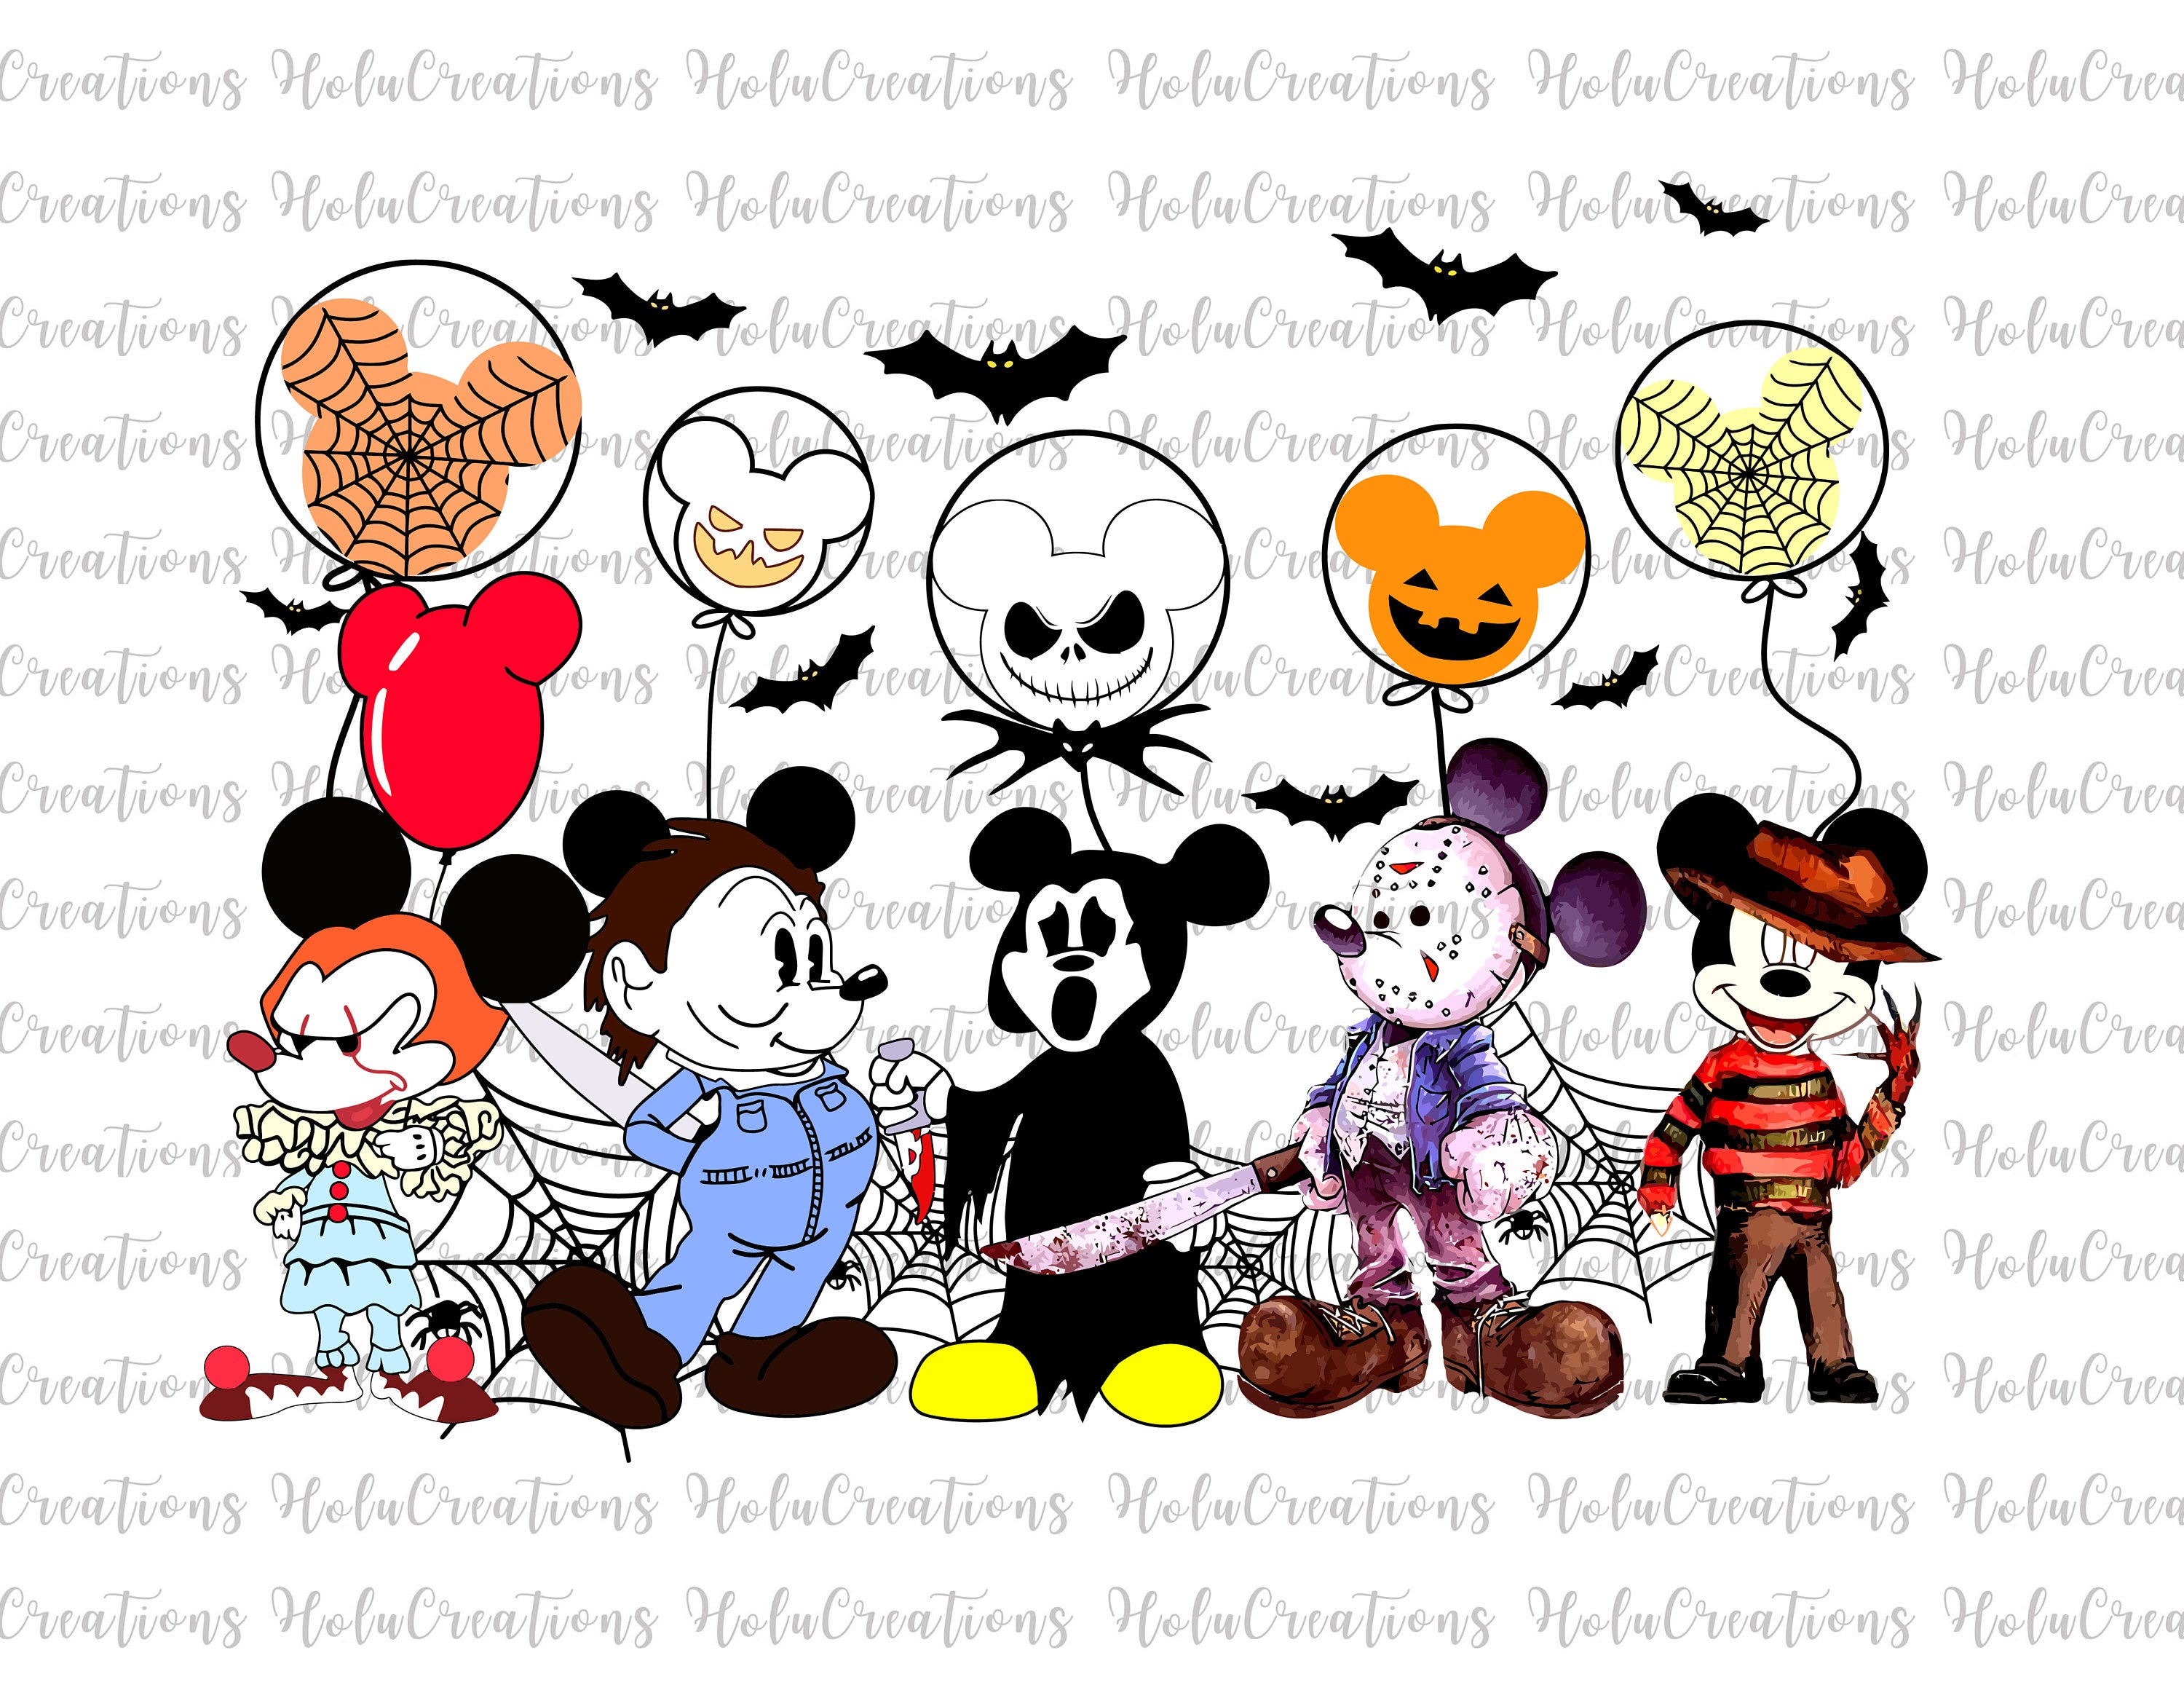 Halloween Costume Svg, Horror Halloween Png, Trick Or Treat Svg, Spooky Vibes, Mummy Mouse, Boo Svg, Cartoon Svg, Bat, Spider Web Cut Files